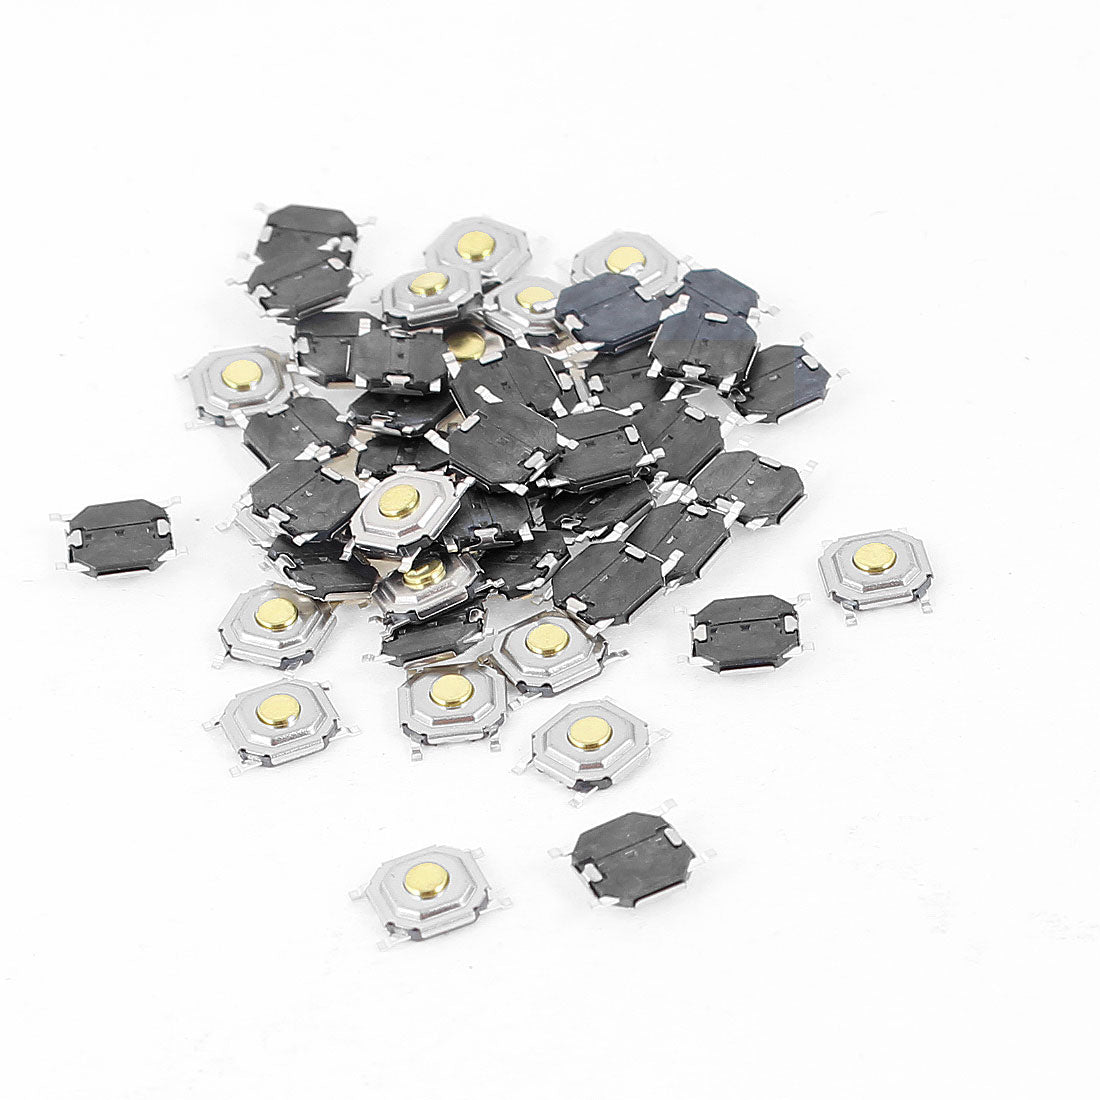 uxcell Uxcell 50 Pcs 5mmx5mmx1.5mm 4 Pins Surface Mounted Devices PCB Momentary Tactile Tact Push Button Switch